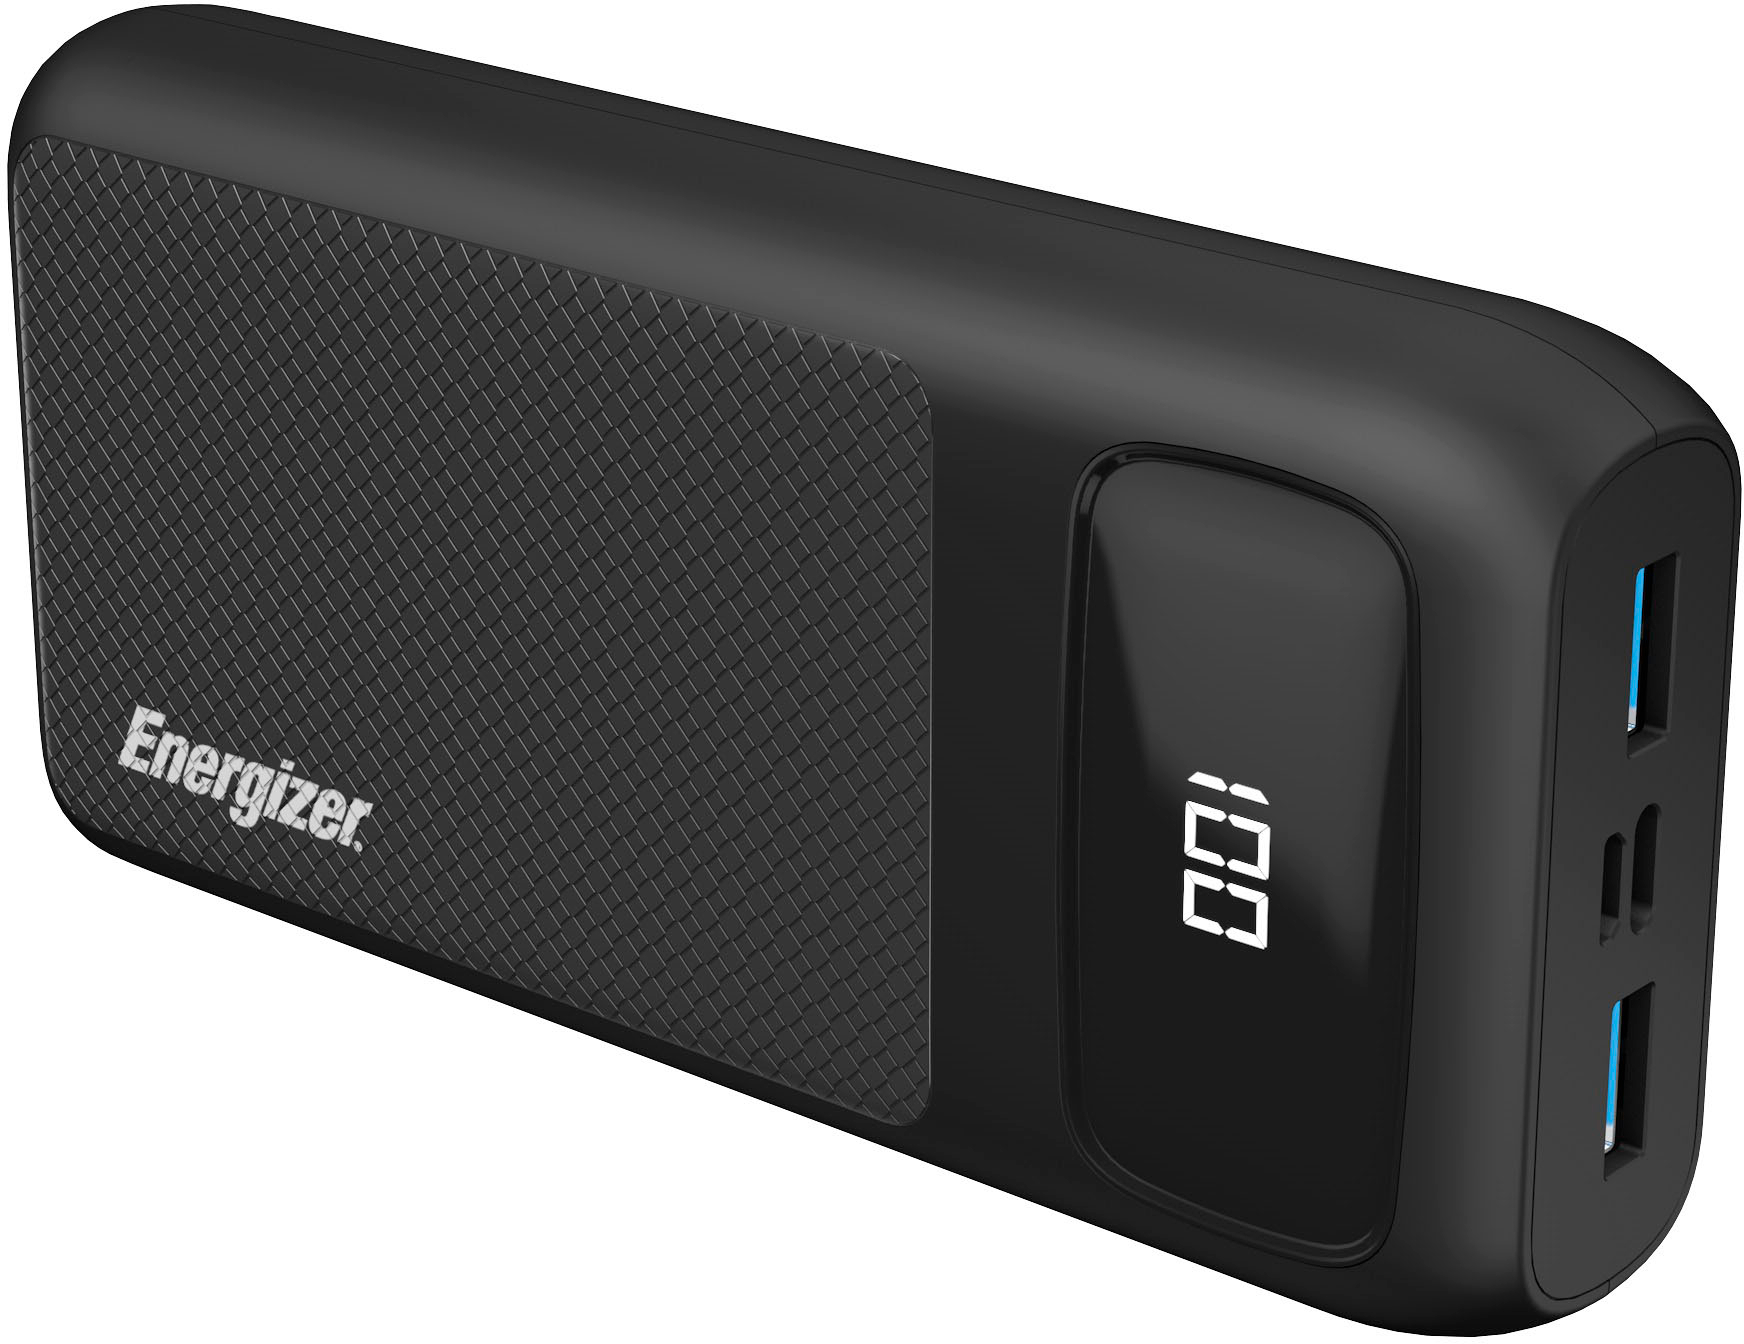 Angle View: Energizer - Ultimate Lithium 20,000 mAh 3-Port 22.5W Fast PD USB-C Universal Portable Battery Charger Power Bank with LCD Display - Black